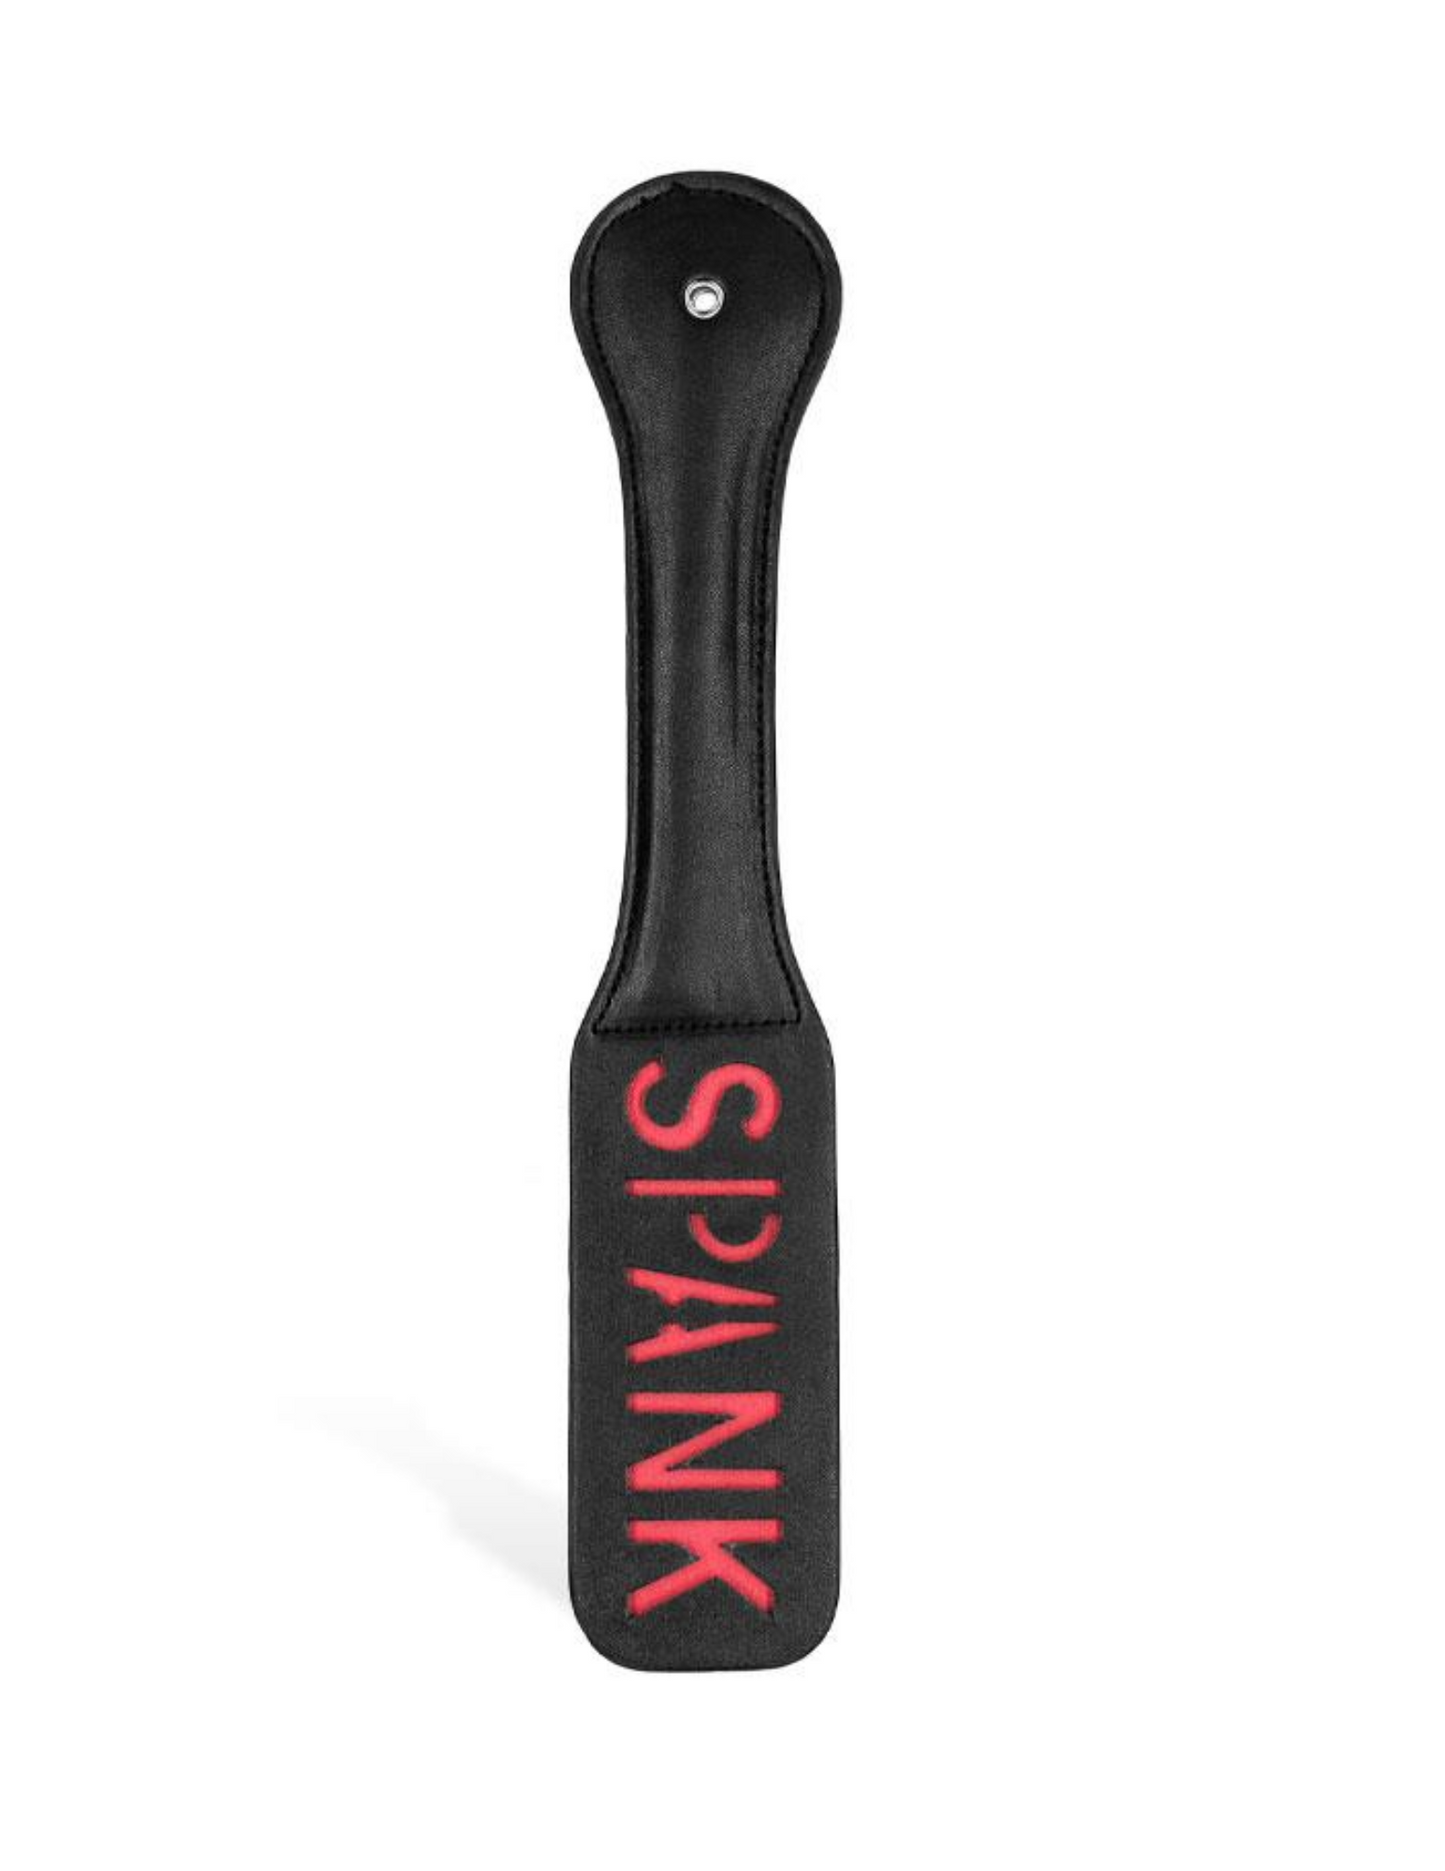 Ouch! Bonded Leather Paddle (Spank).